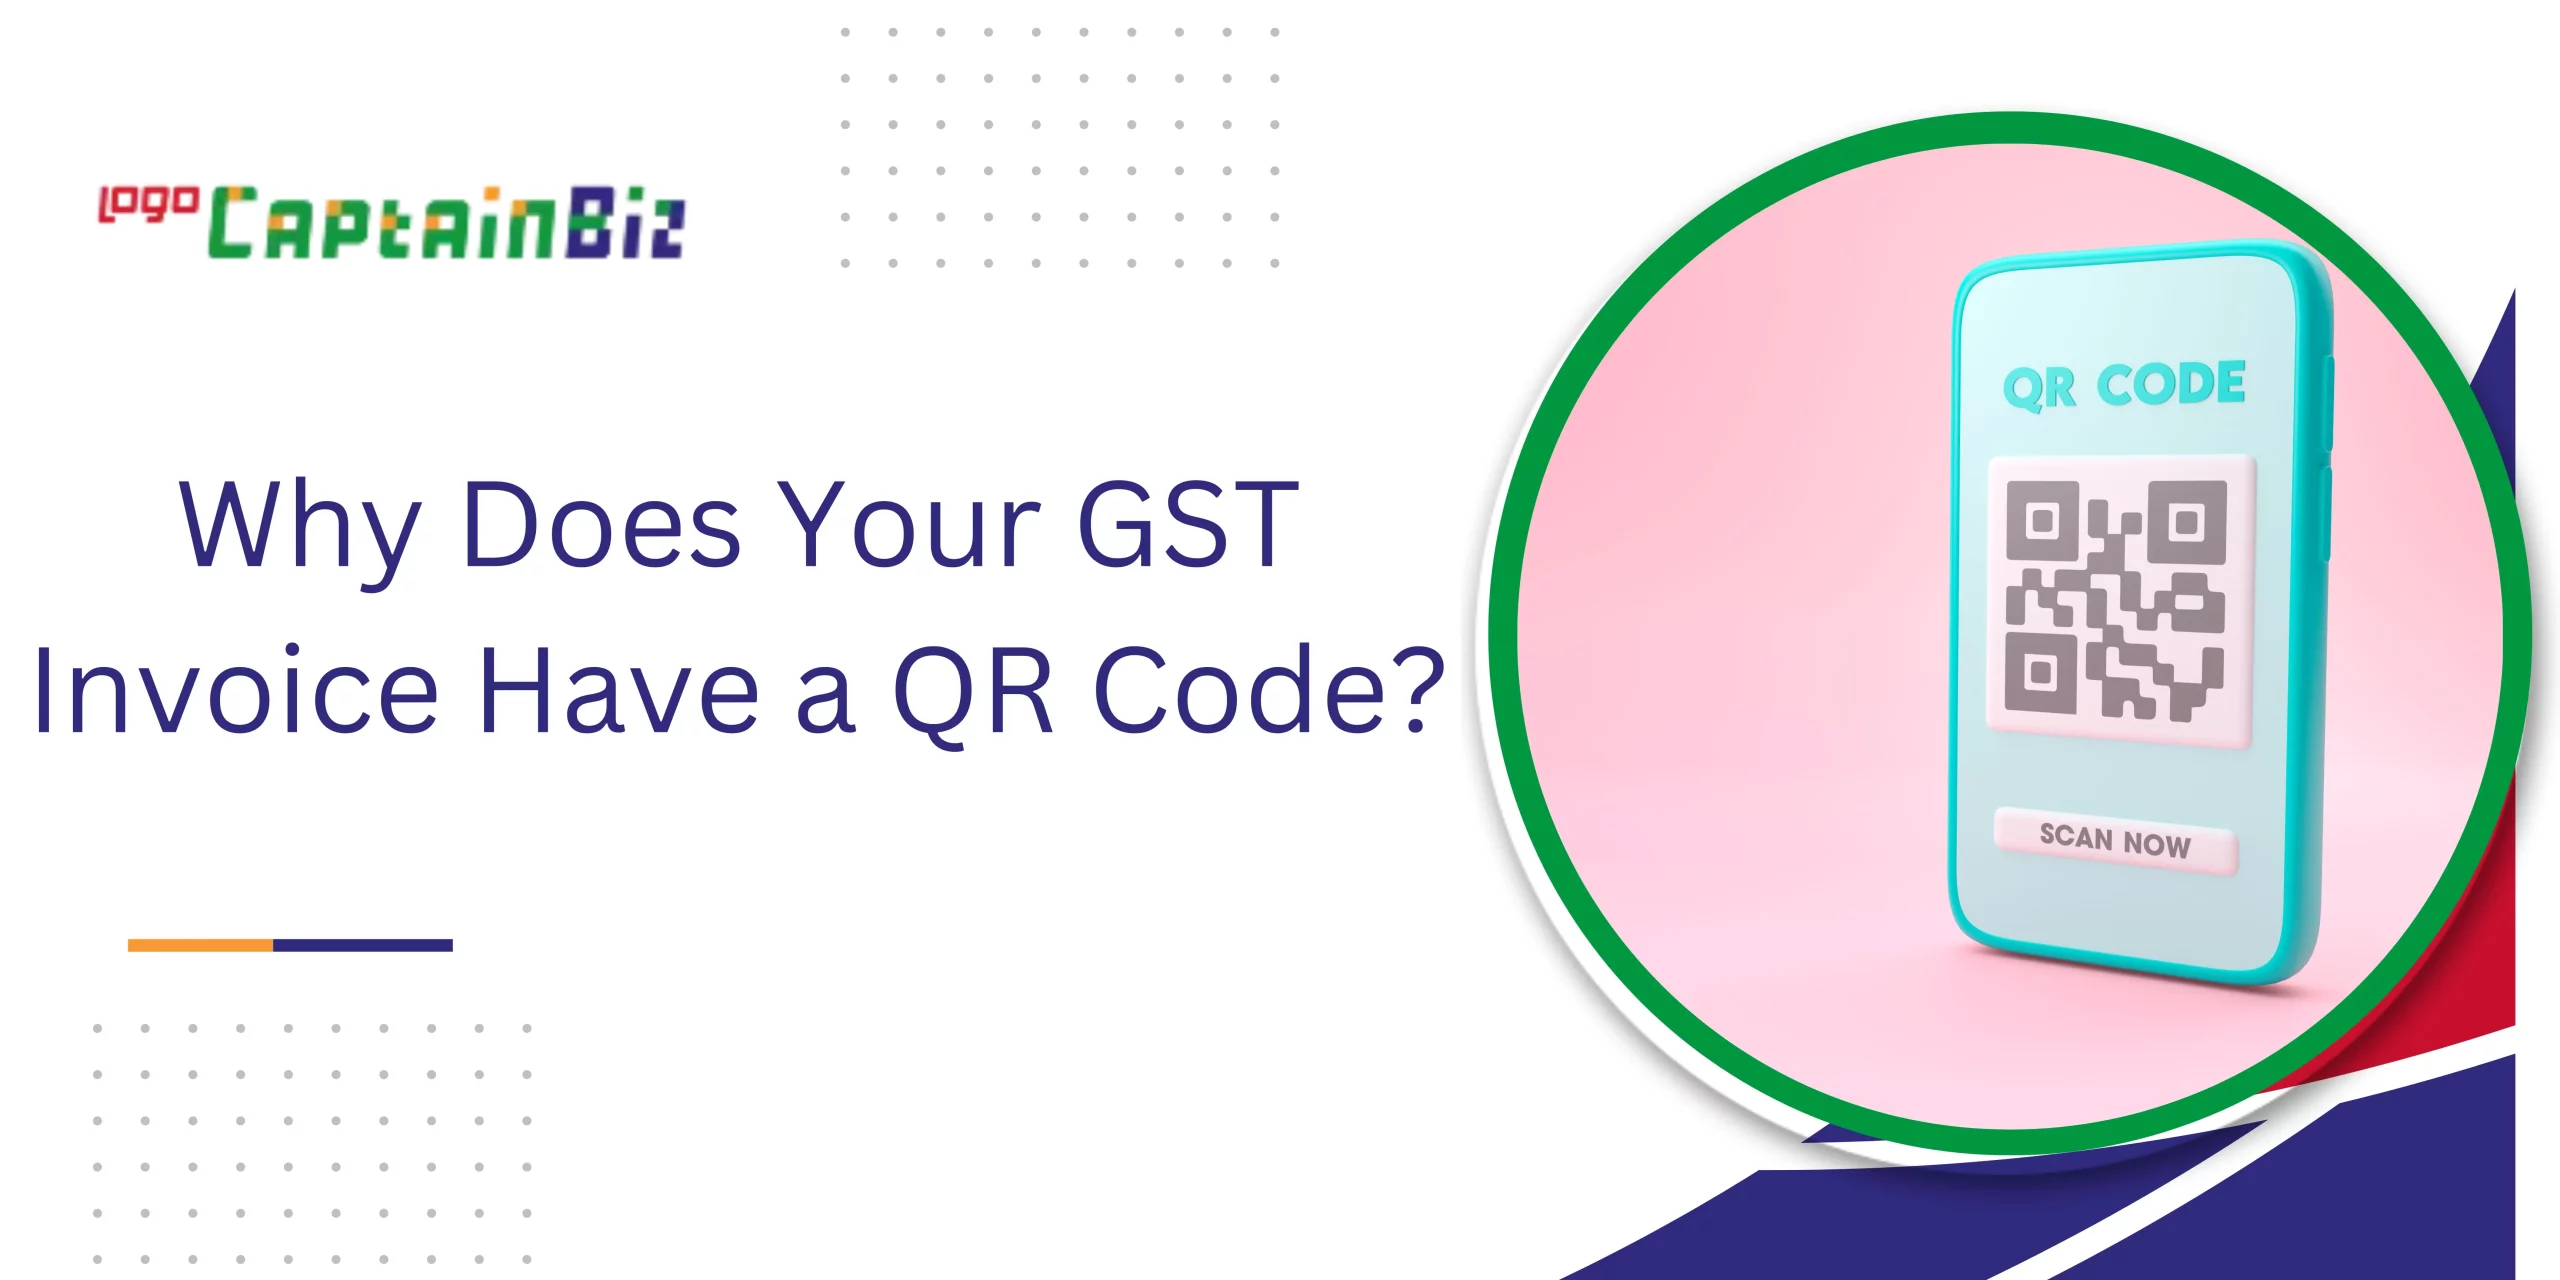 CaptainBiz: Why Does Your GST Invoice Have a QR Code